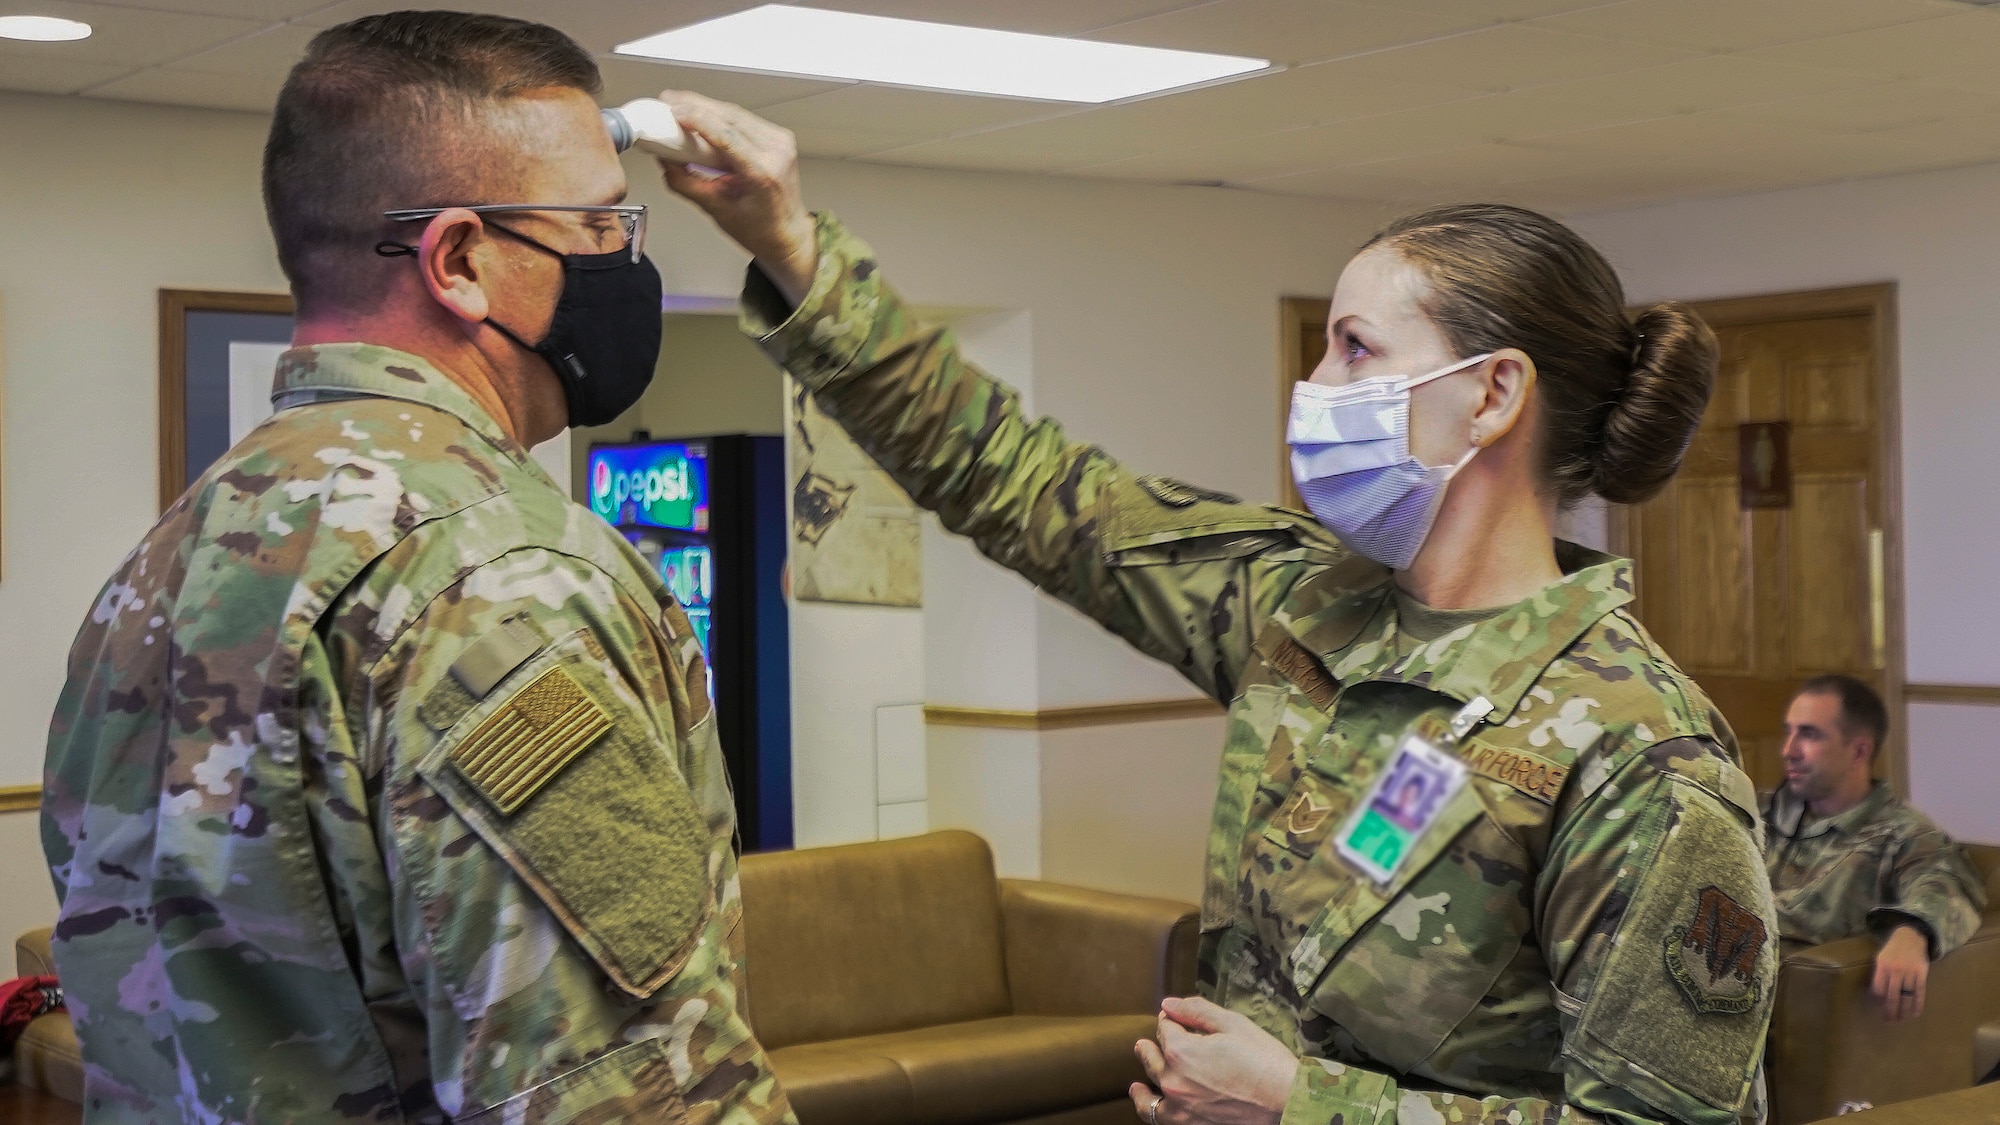 Airman gets his temperature checked by another Airman.